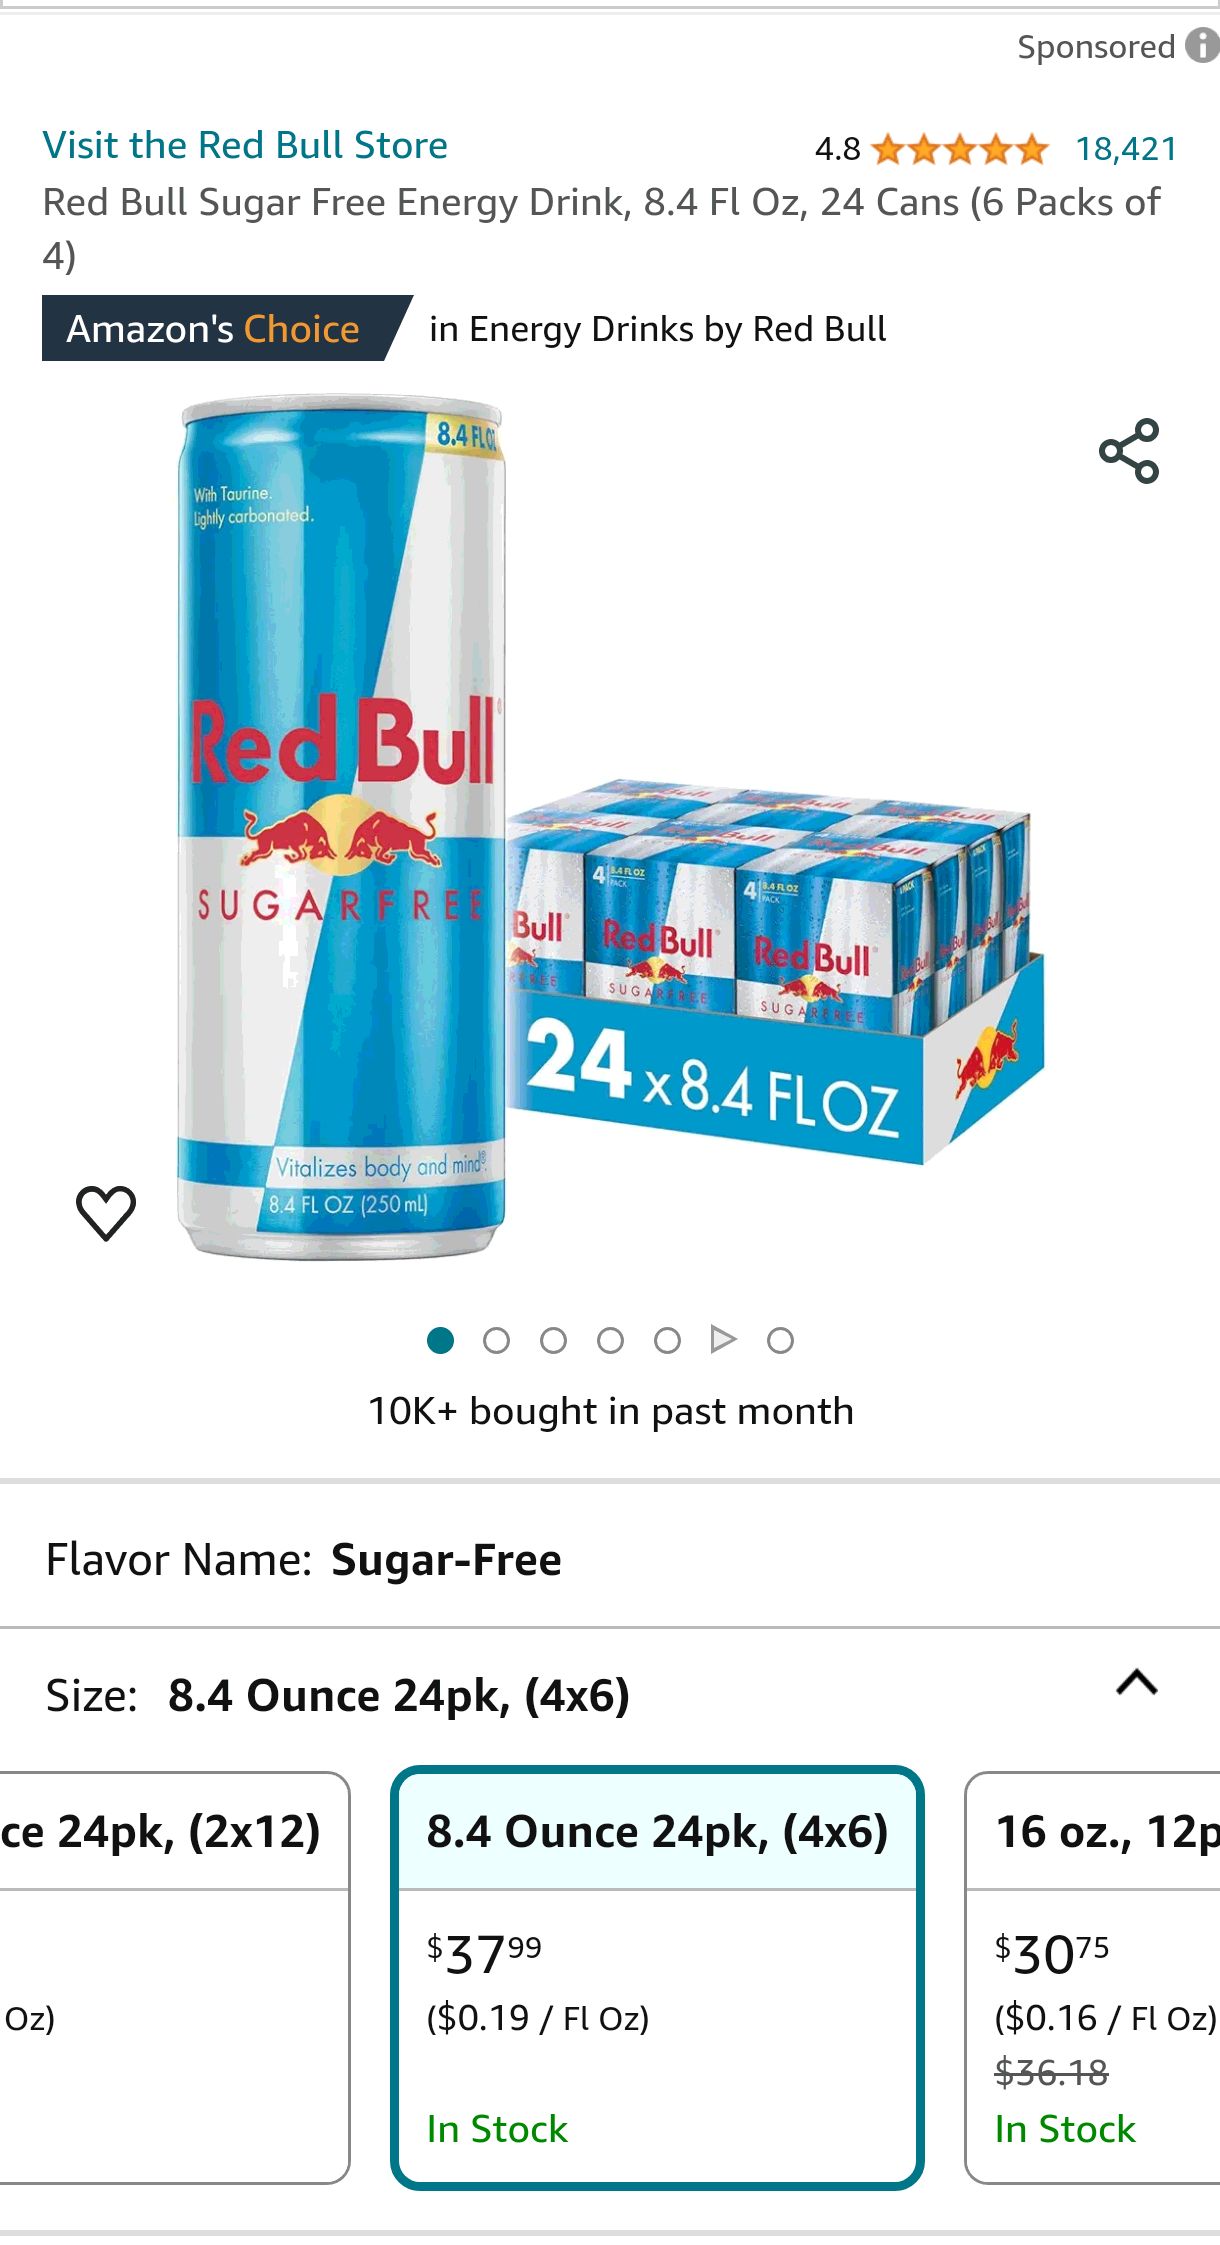 Amazon.com : Red Bull Sugar Free Energy Drink, 8.4 Fl Oz, 24 Cans (6 Packs of 4) : Energy Drinks : Everything Else